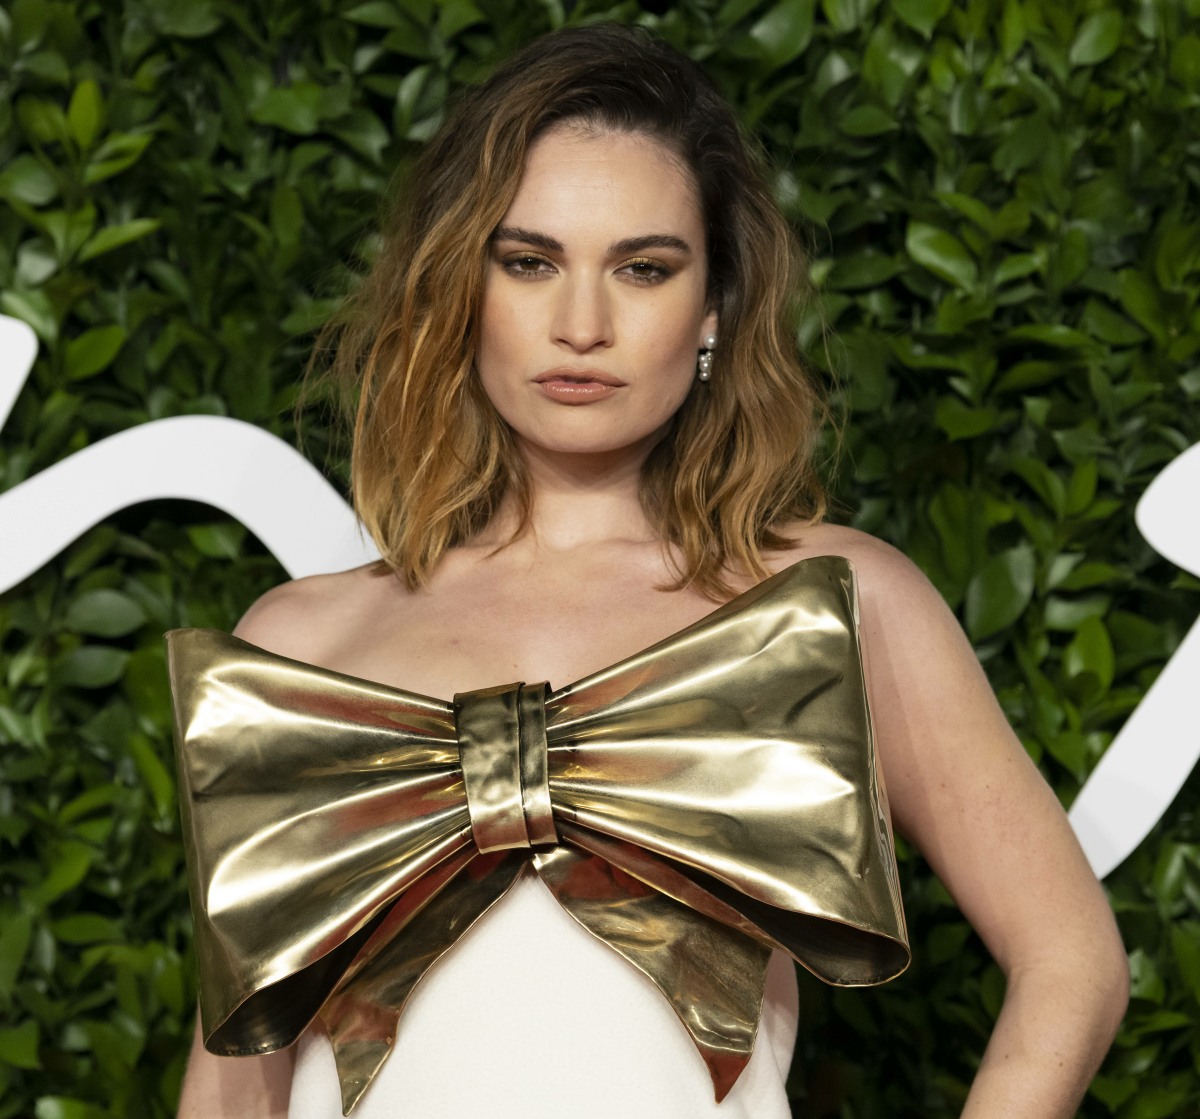 Lily James attends The Fashion Awards 2019 at The Royal Albert Hall. London, UK. 02/12/2019